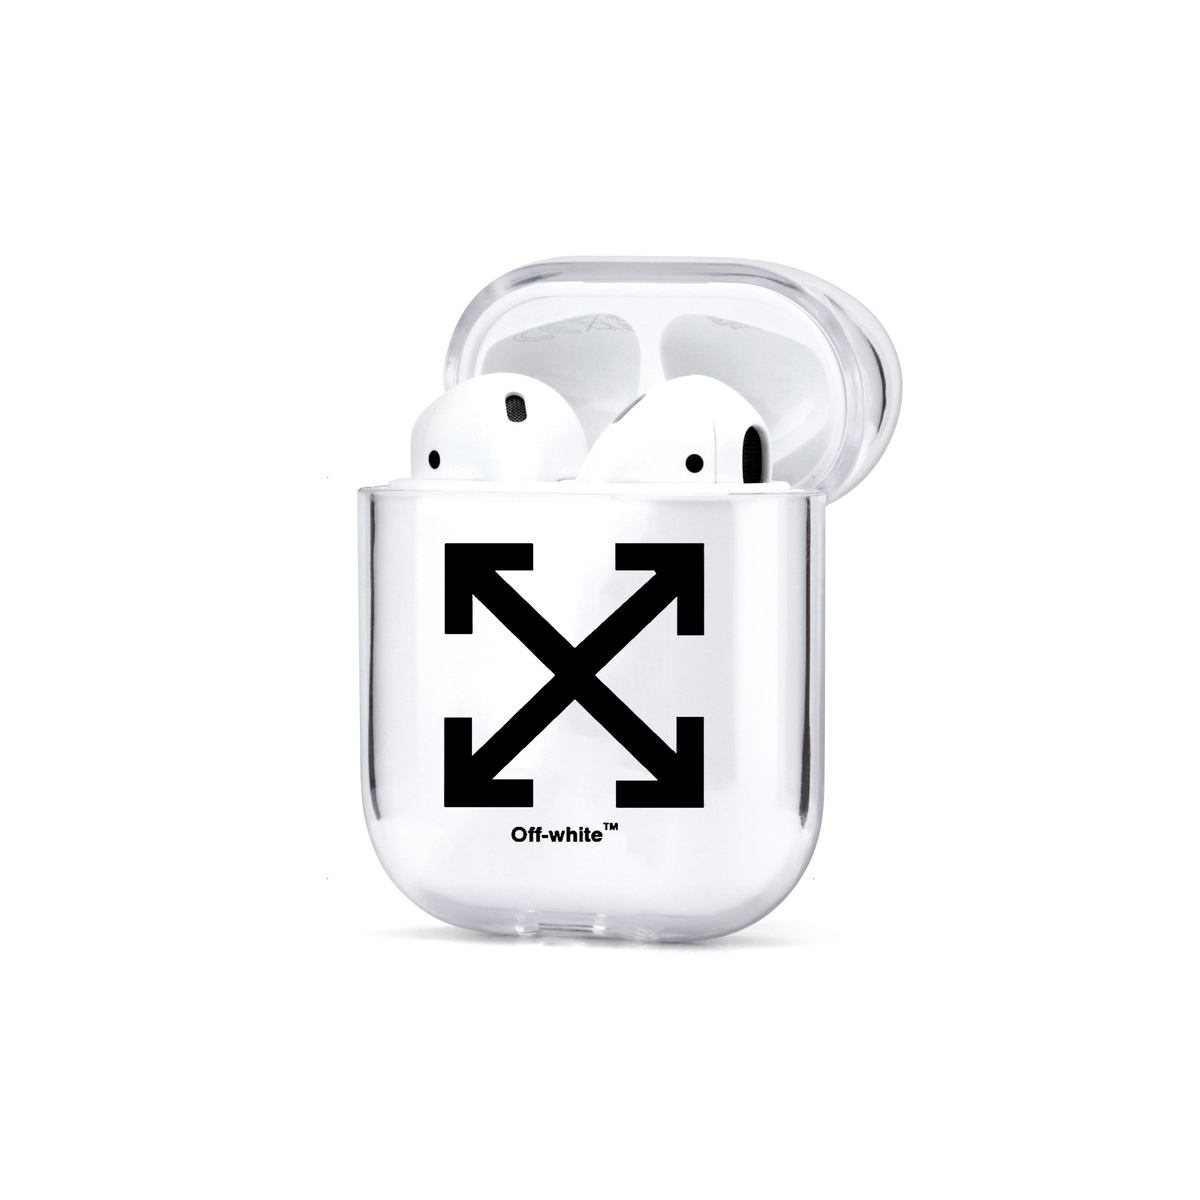 Buy > off white airpod case real > in stock